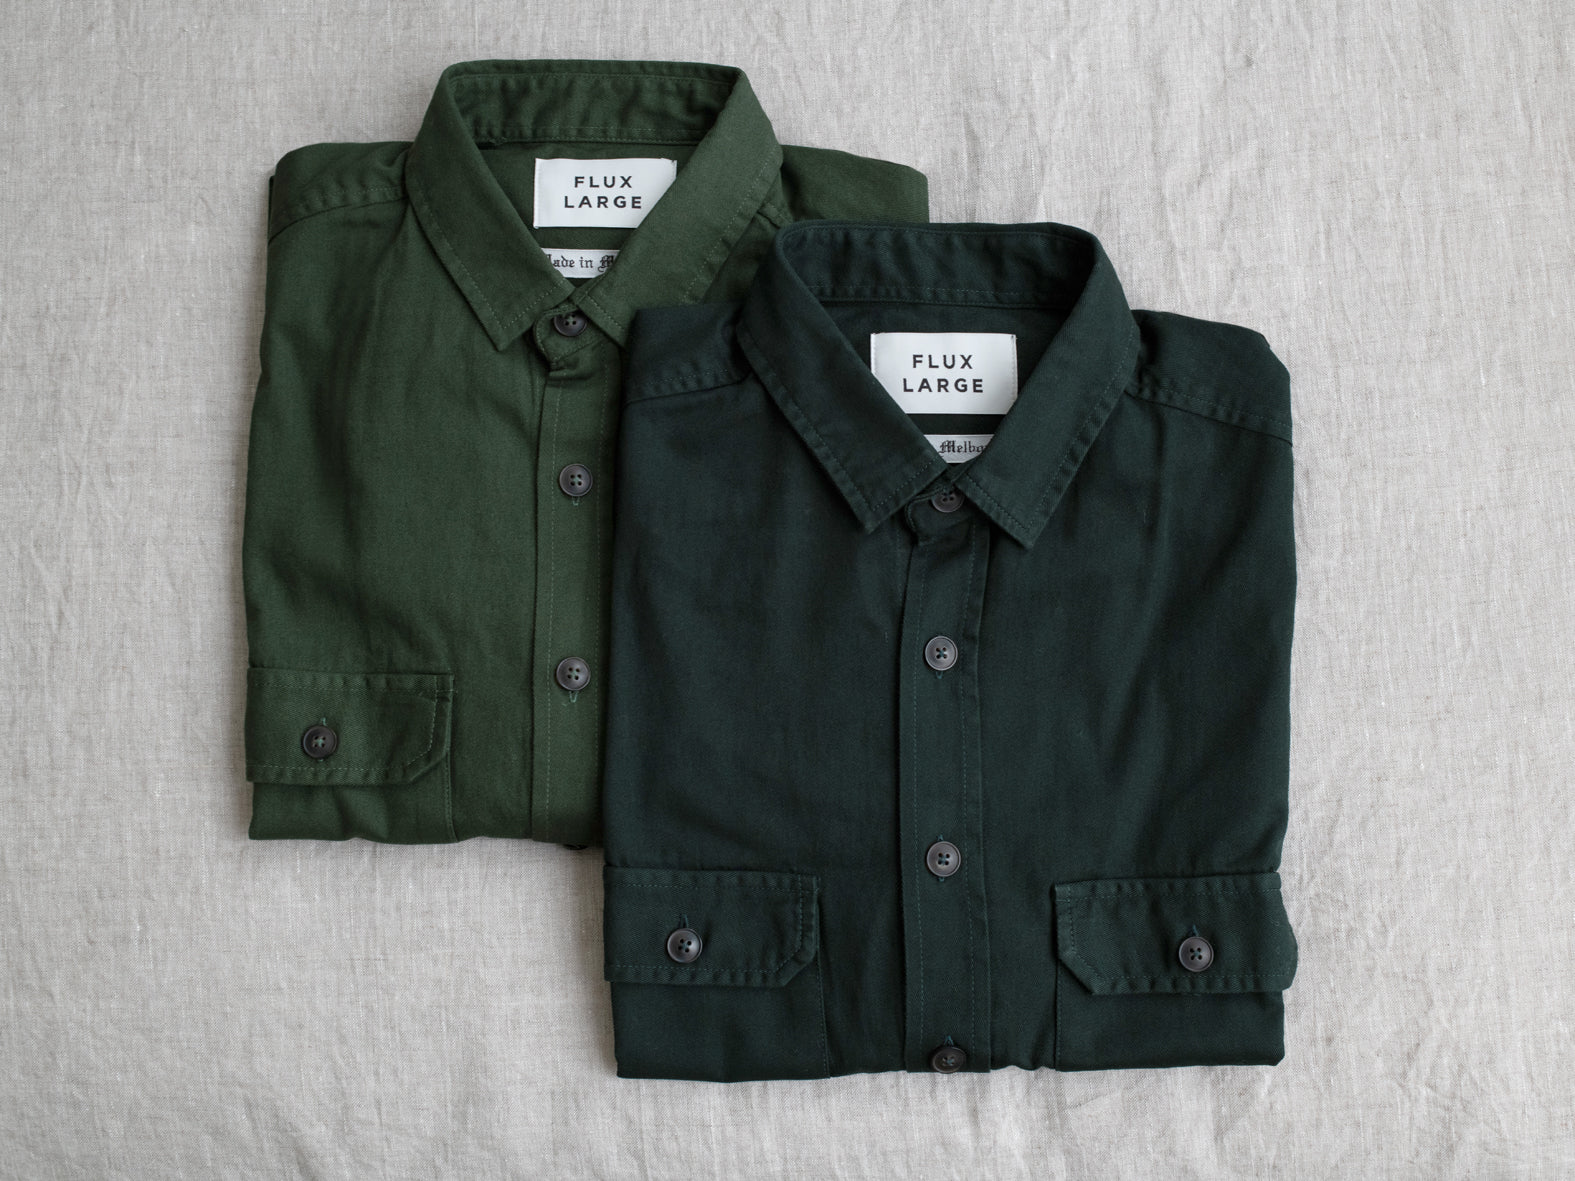 THE SMITH. WORK SHIRT. FOREST